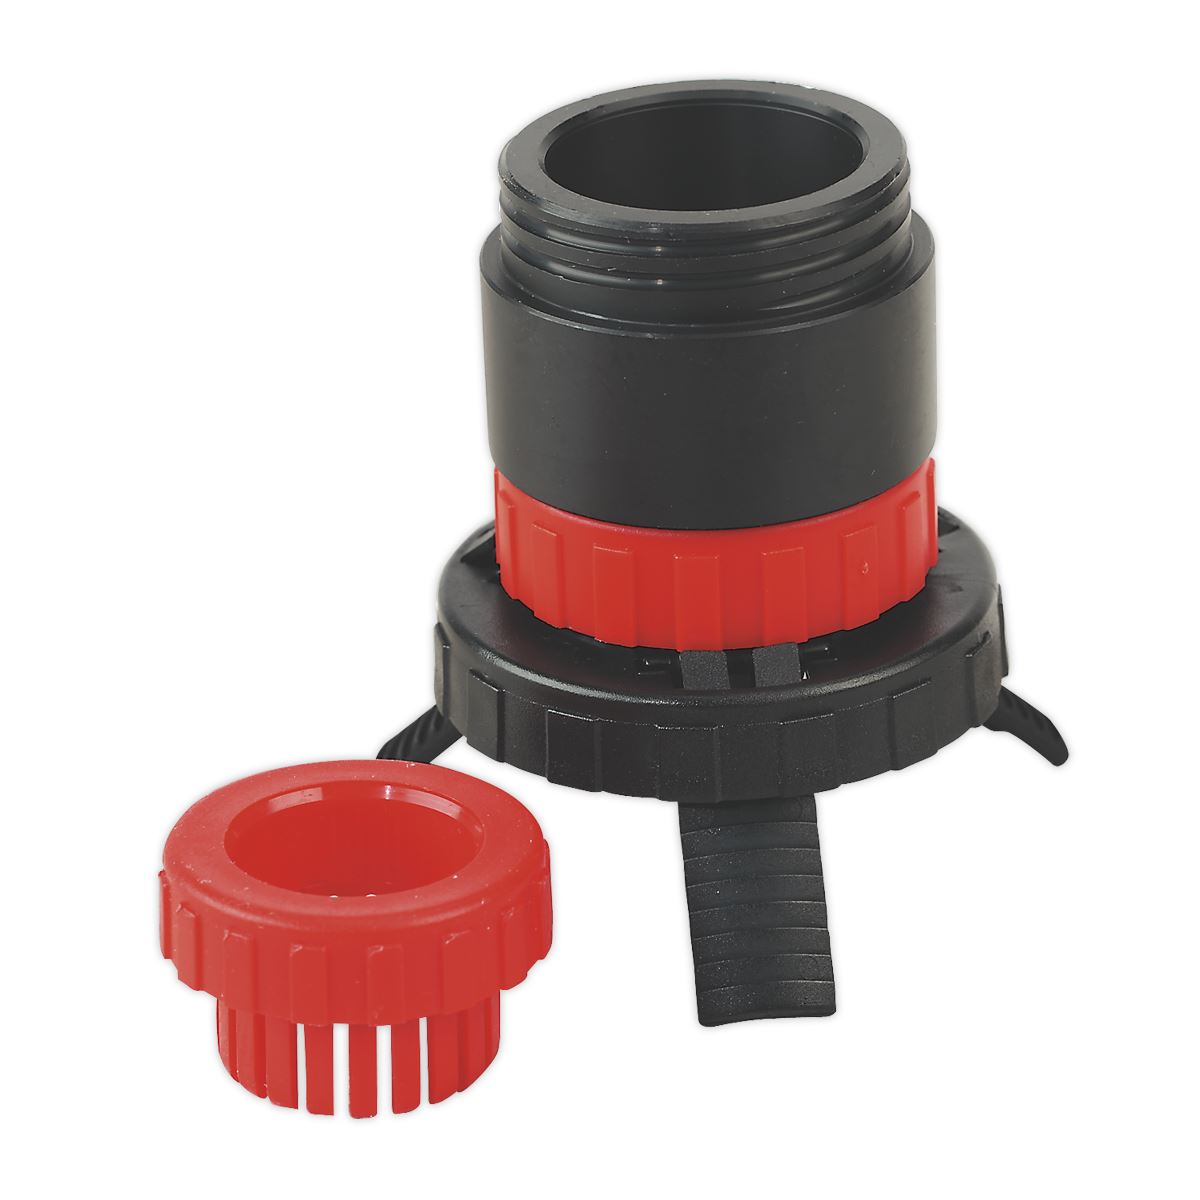 Sealey Universal Drum Adaptor fits SOLV/SF to Plastic Pouring Spouts